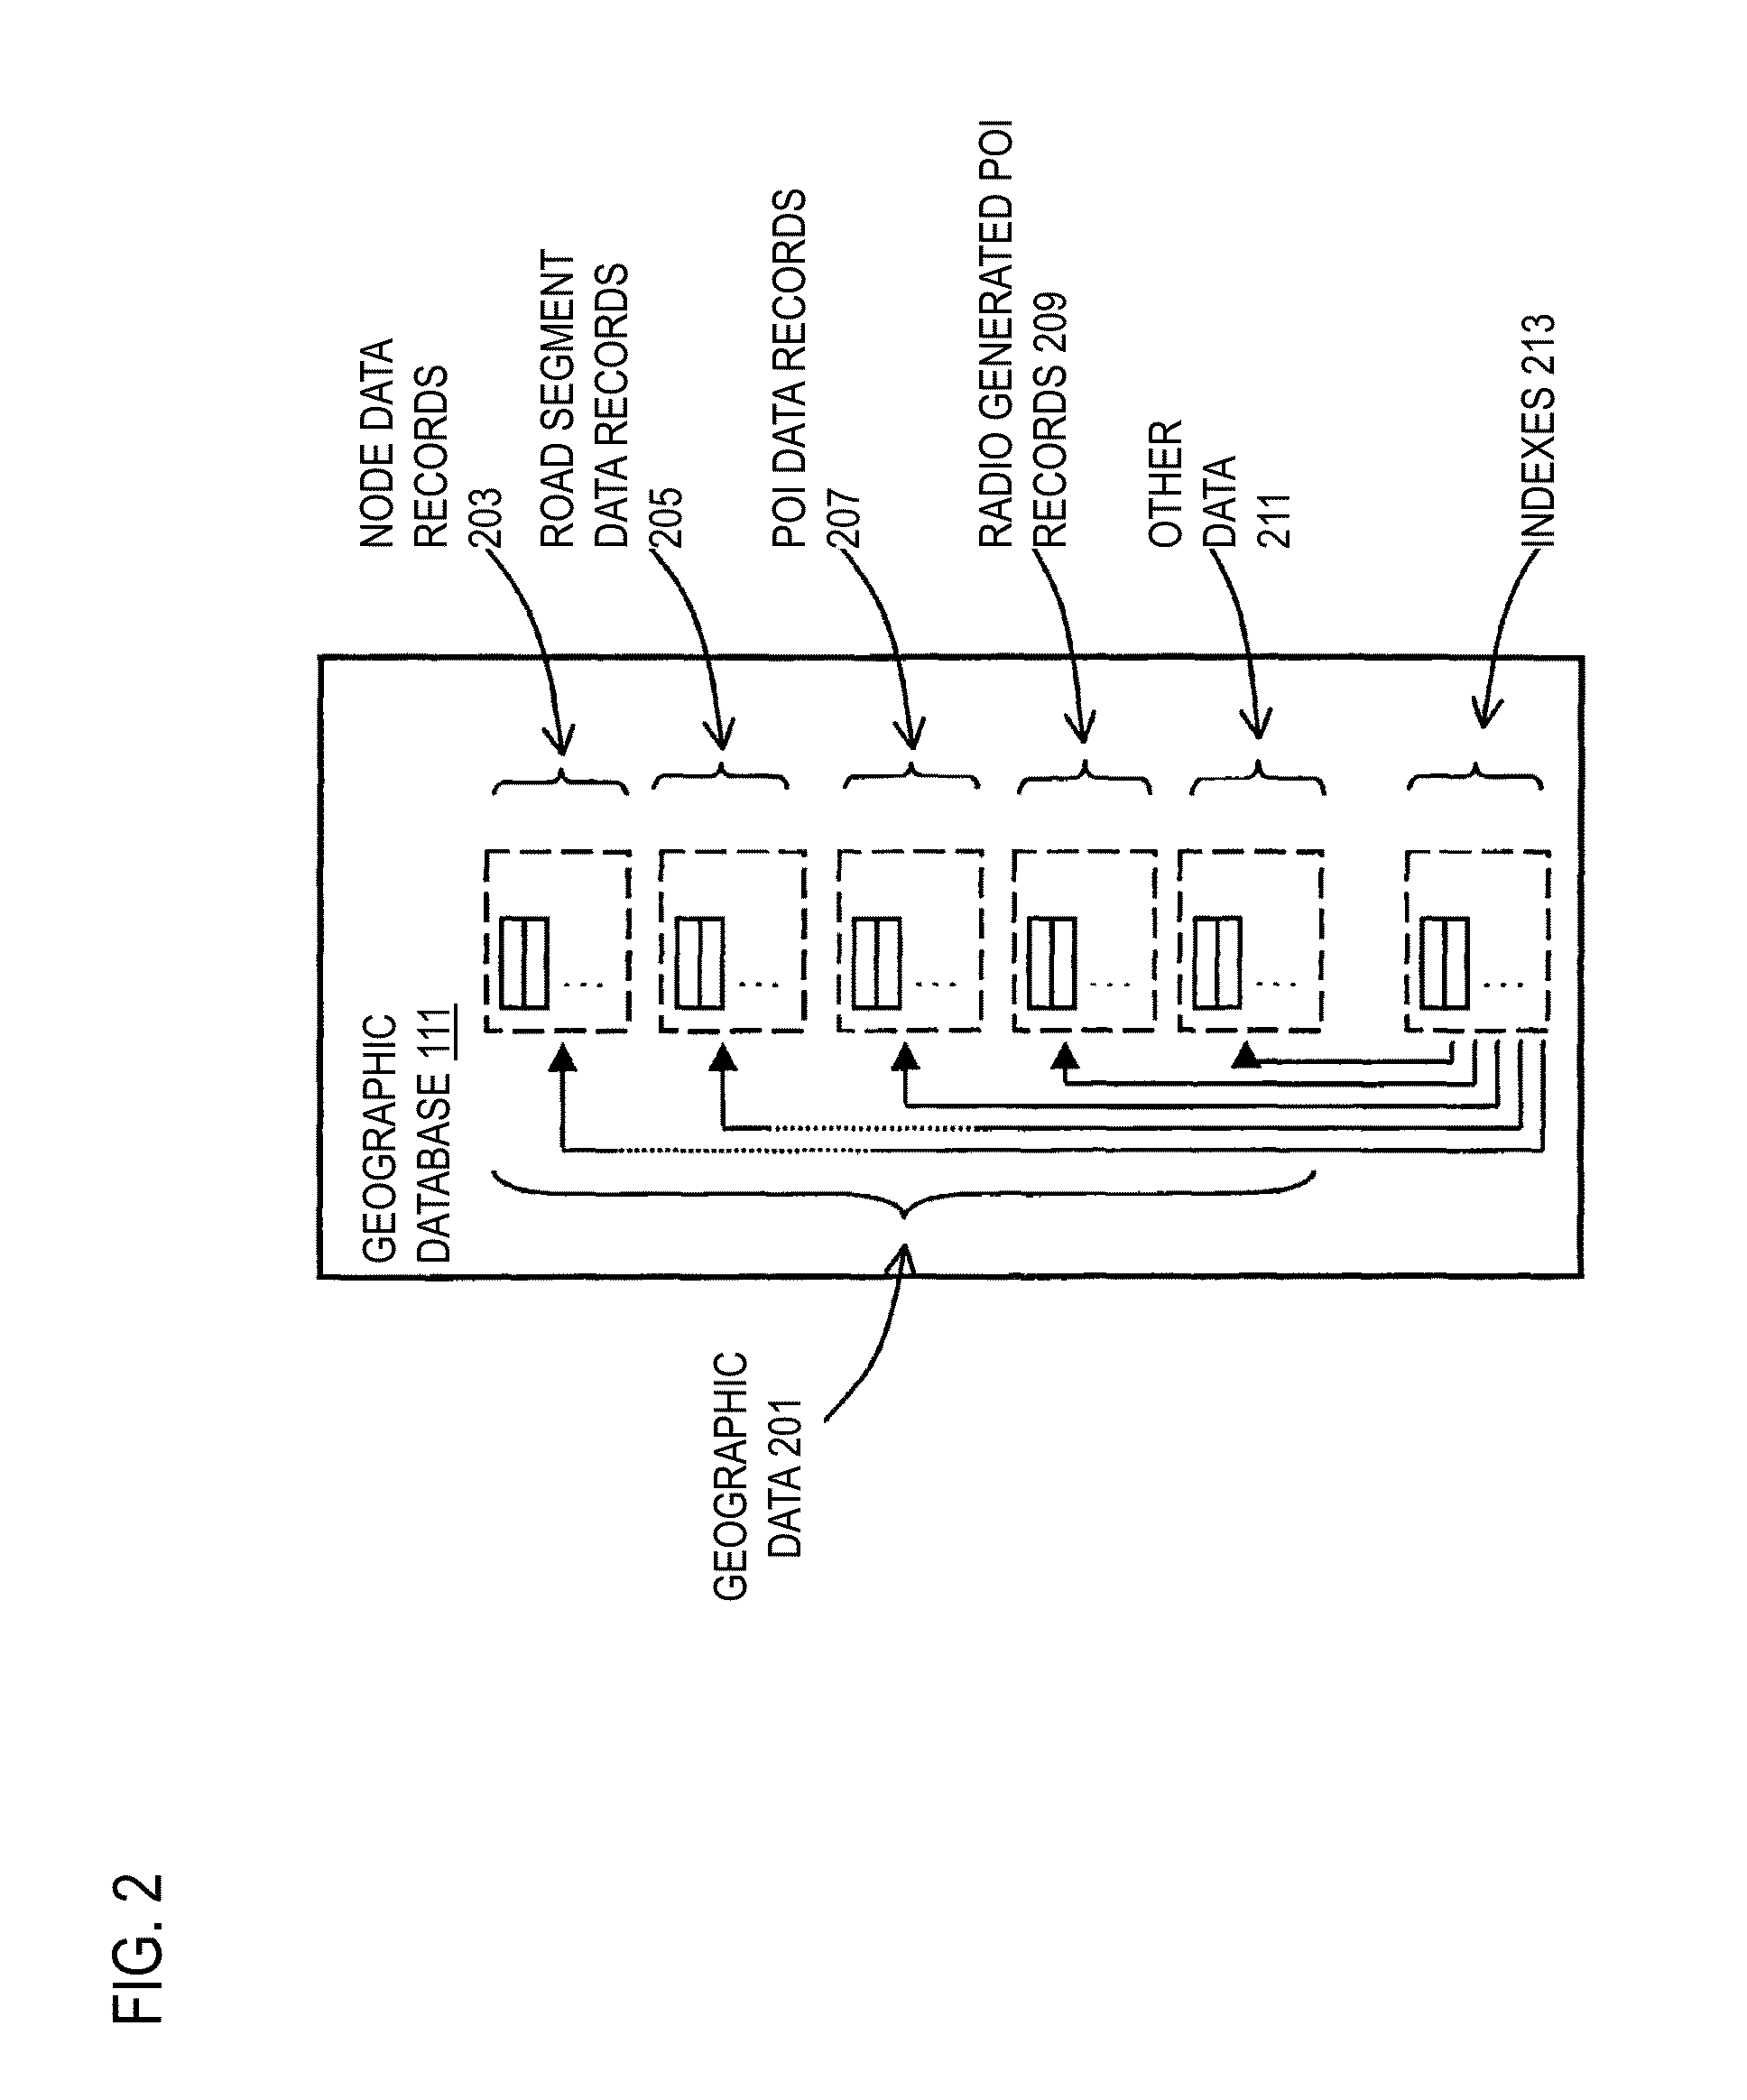 Method and apparatus for providing navigation guidance via proximate devices